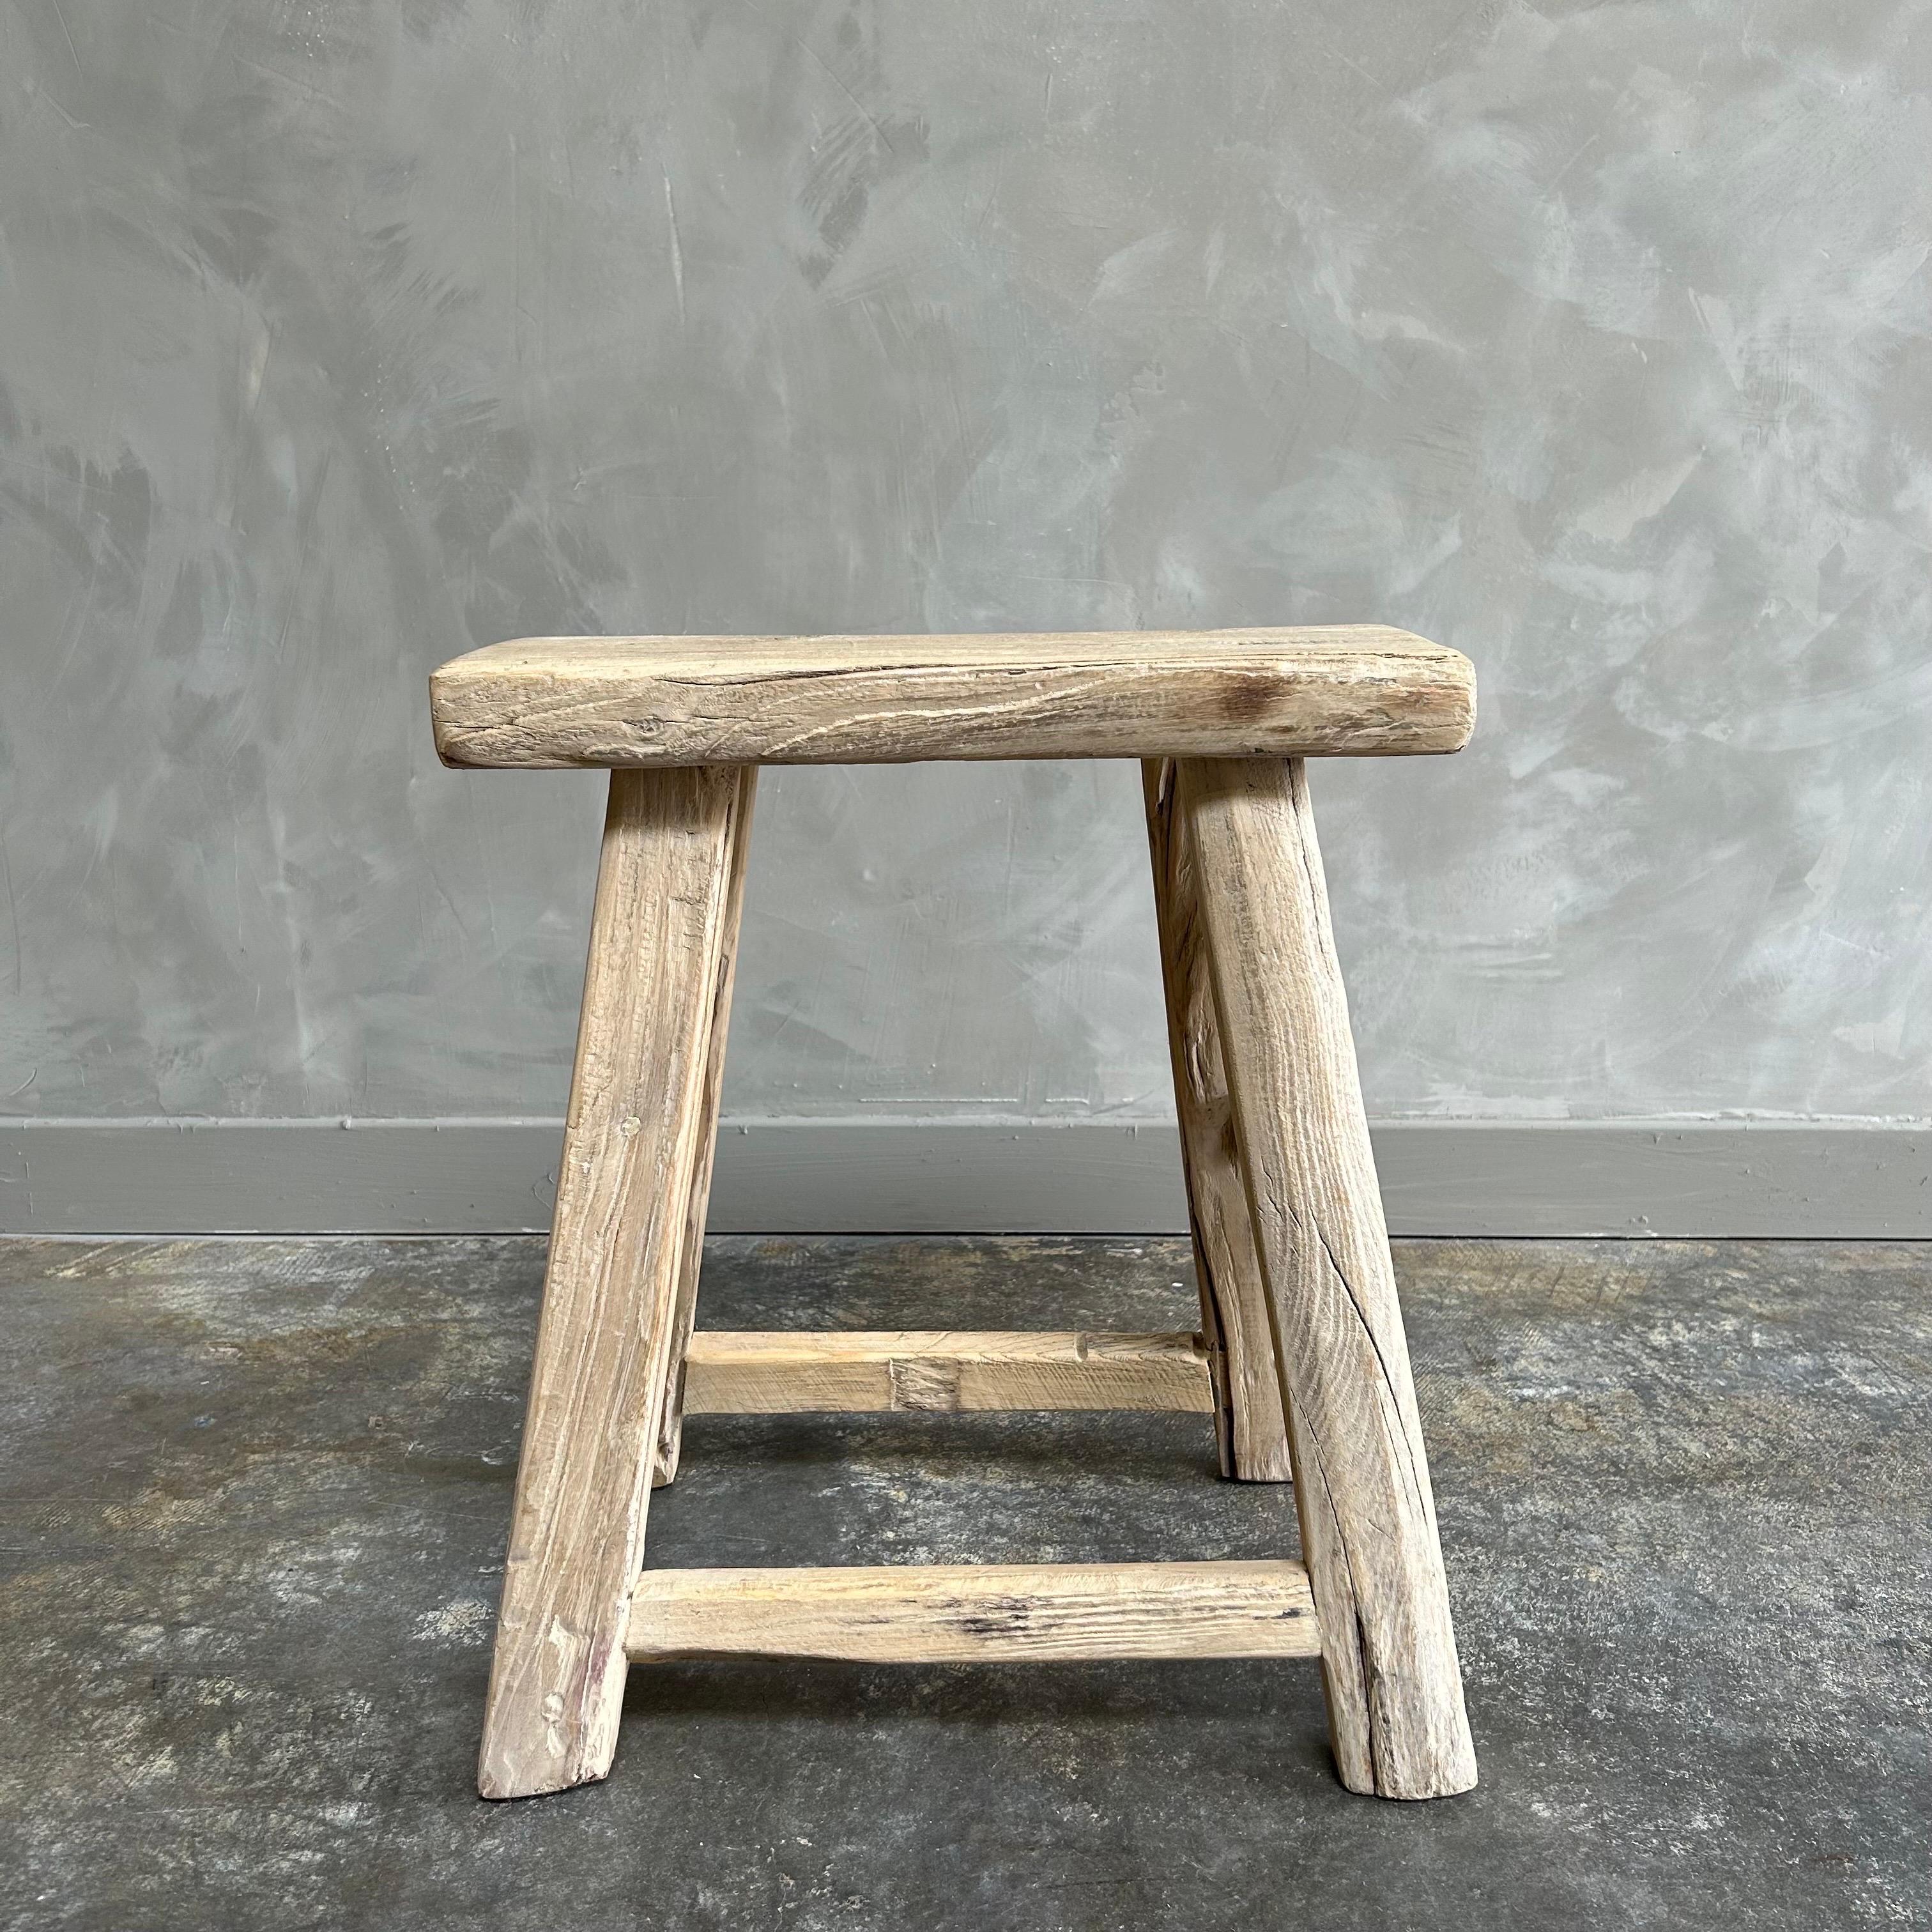 Welcome to bloomhomeinc we stock over 2000 items, please scroll down and click view sellers other items to see more!
Size: 17”w x 12”d x 19”h
SD:9-1/2”
Vintage Antique Elm Wood stool made from vintage reclaimed elm wood. Beautiful antique patina,